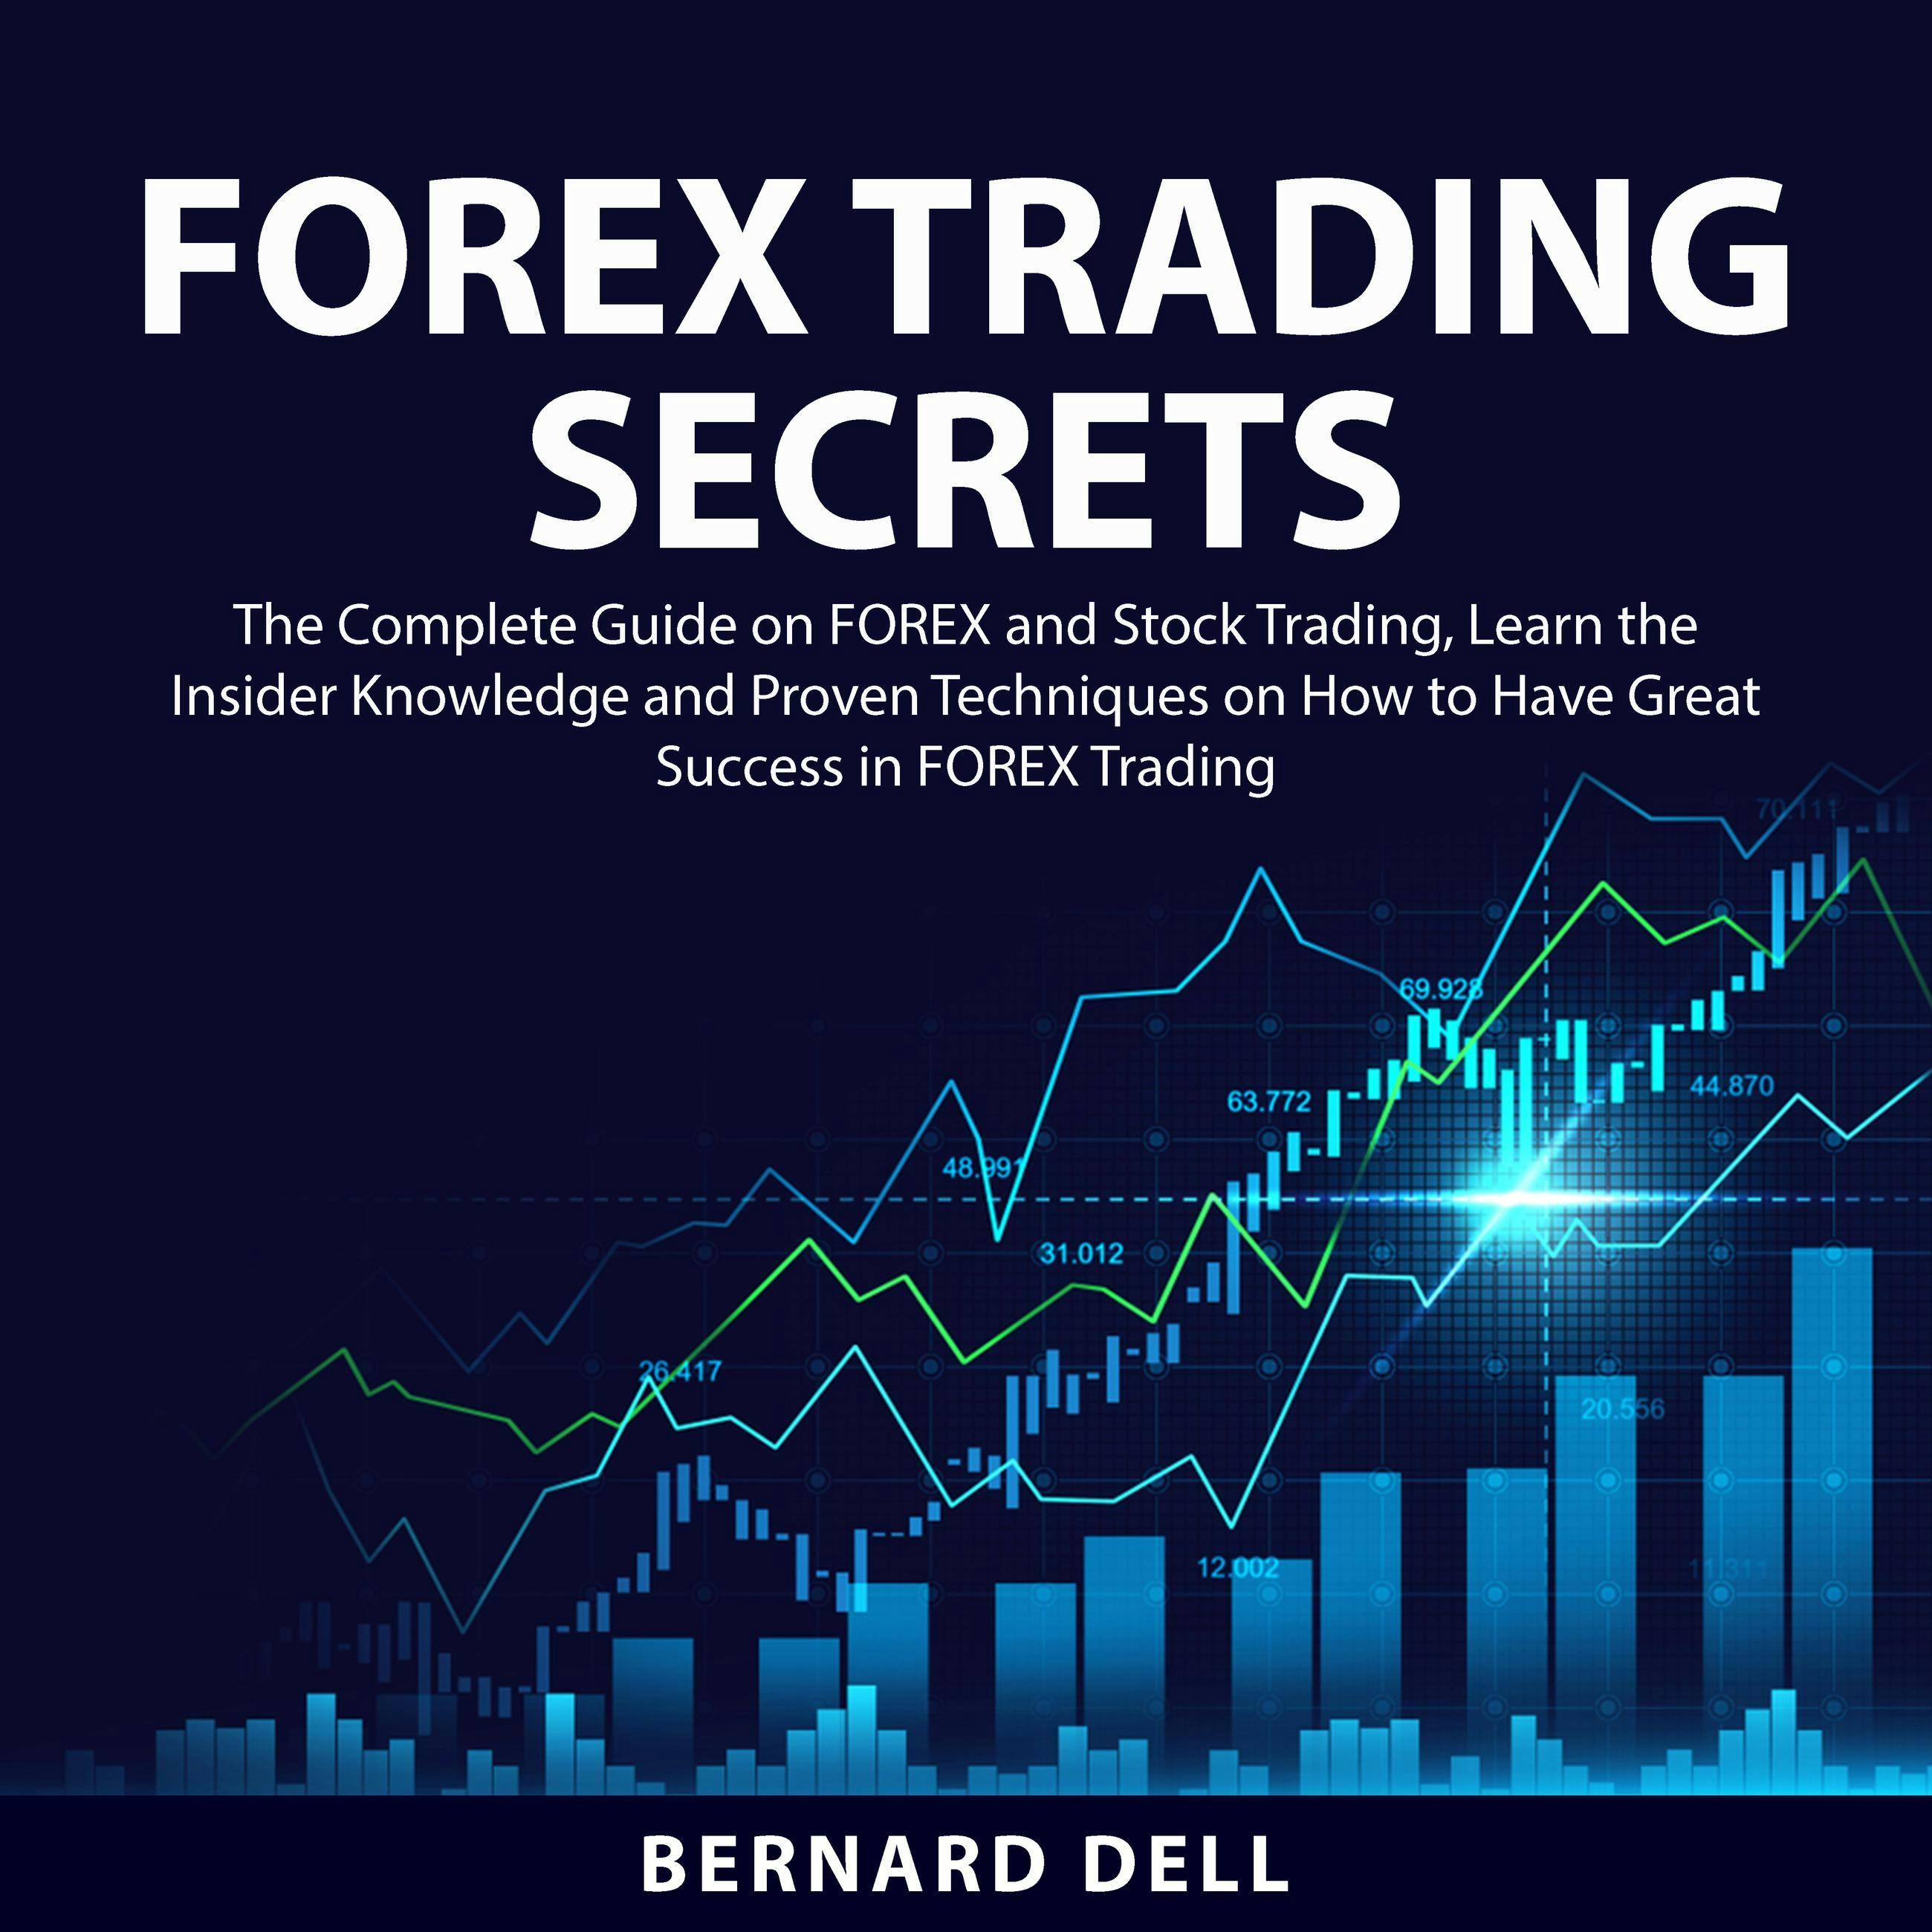 FOREX Trading Secrets: The Complete Guide on FOREX and Stock Trading, Learn the Insider Knowledge and Proven Techniques on How to Have Great Success in FOREX Trading - Bernard Dell